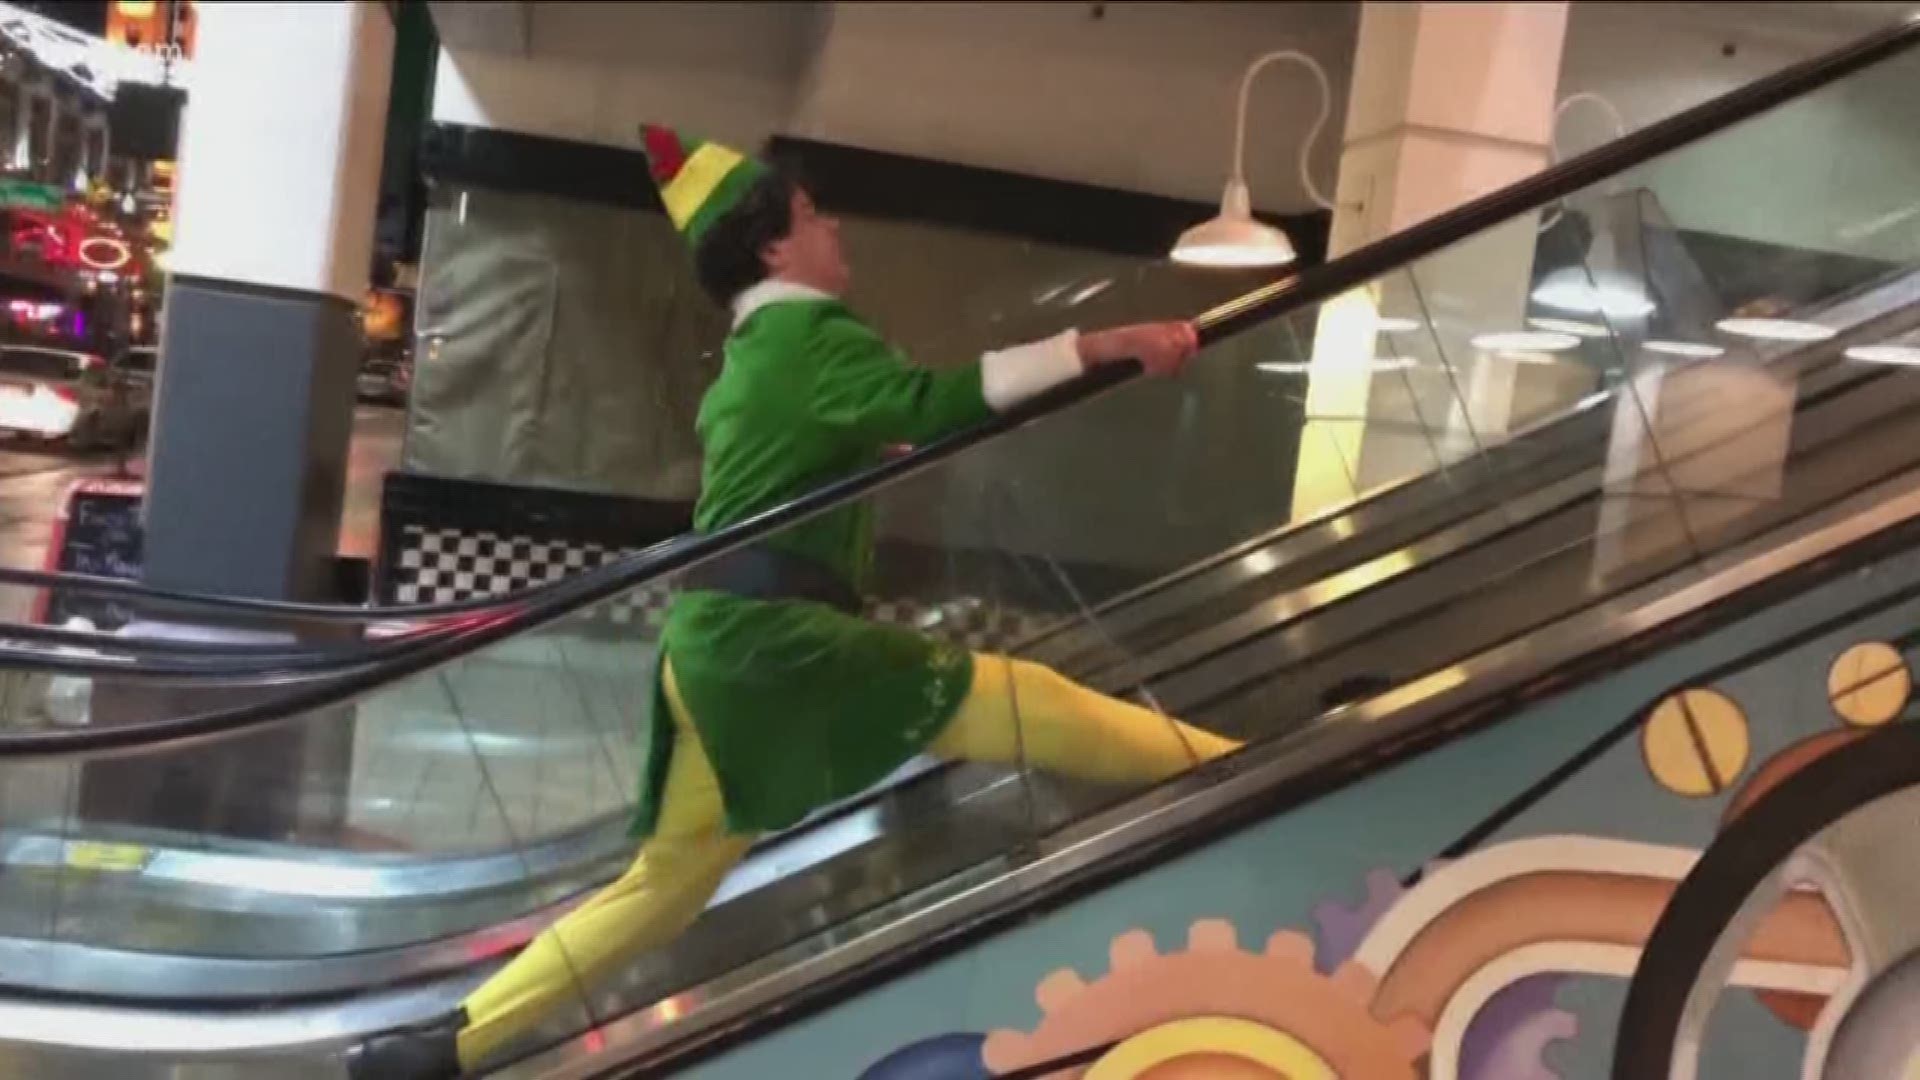 The Micron employee becomes Buddy the Elf and heads downtown to share his Christmas spirit.